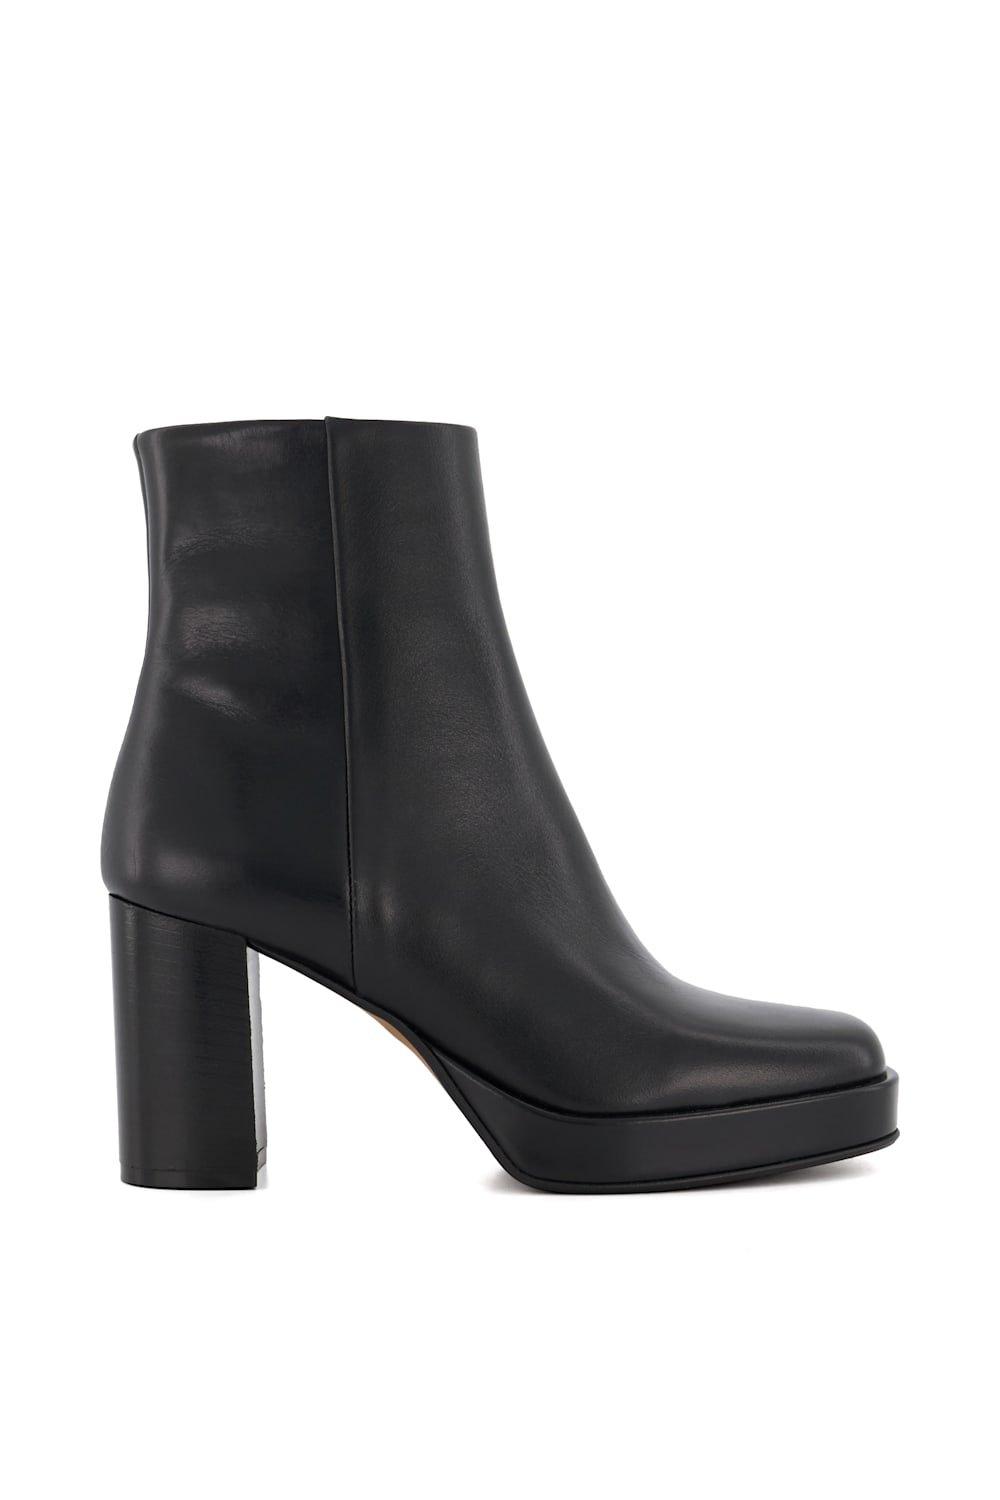 Boots | 'Pallet' Leather Ankle Boots | Dune London